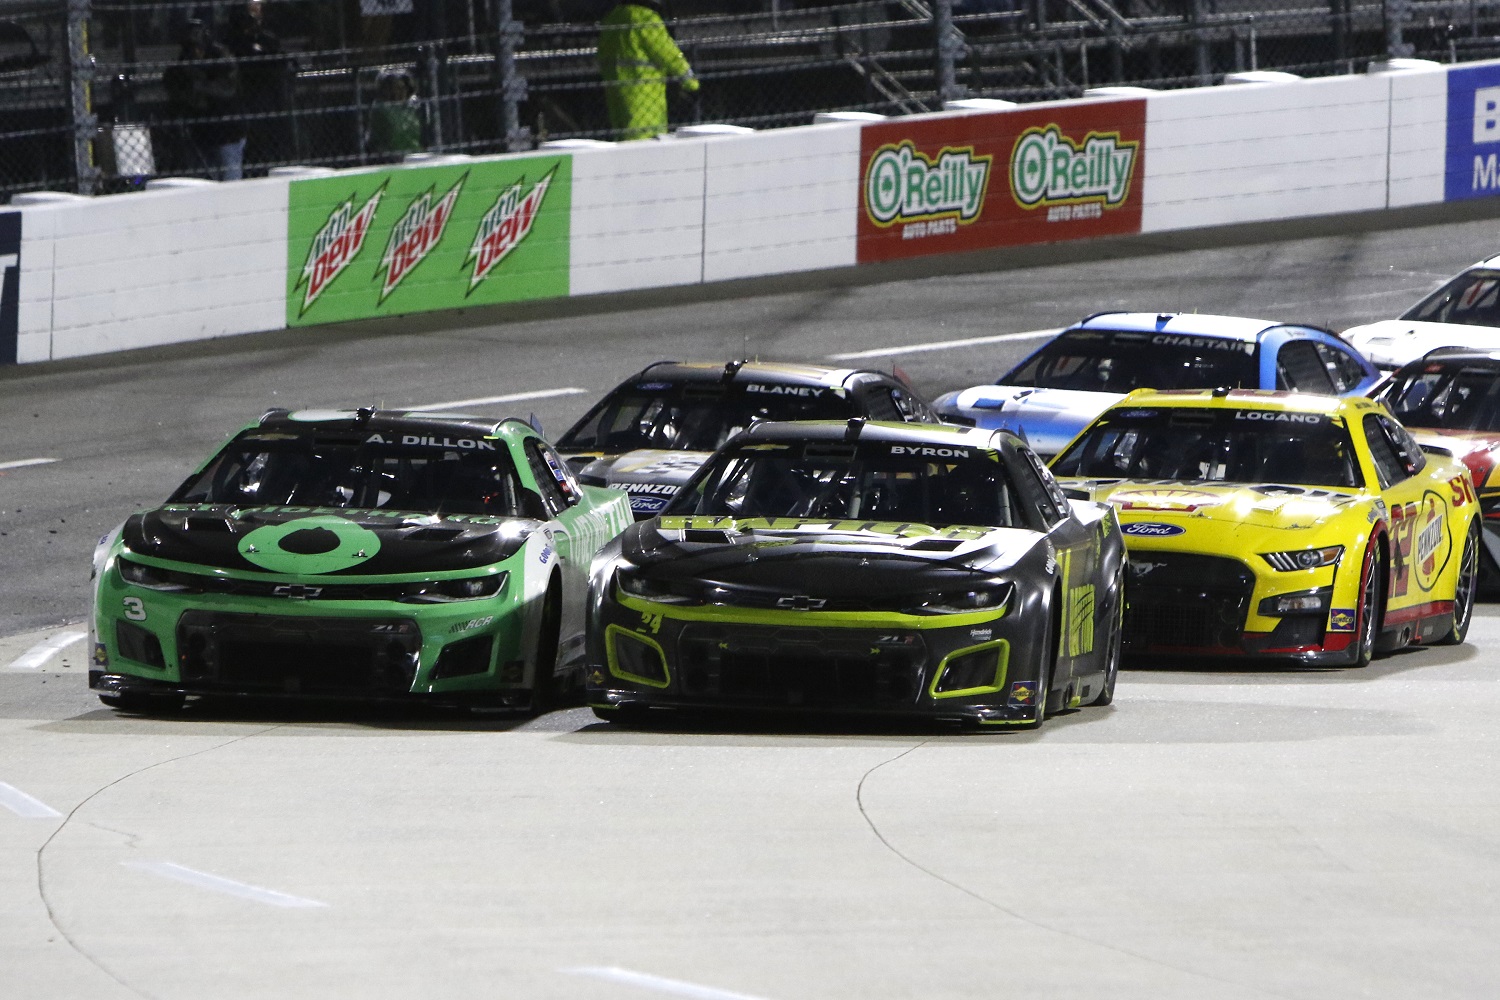 A late restart for William Byron (No. 24 Chevrolet) and Austin Dillon (No. 3 Chevrolet) during the NASCAR Cup Series Blue-Emu Maximum Pain Relief 400 on April 9, 2022, at Martinsville Speedway.